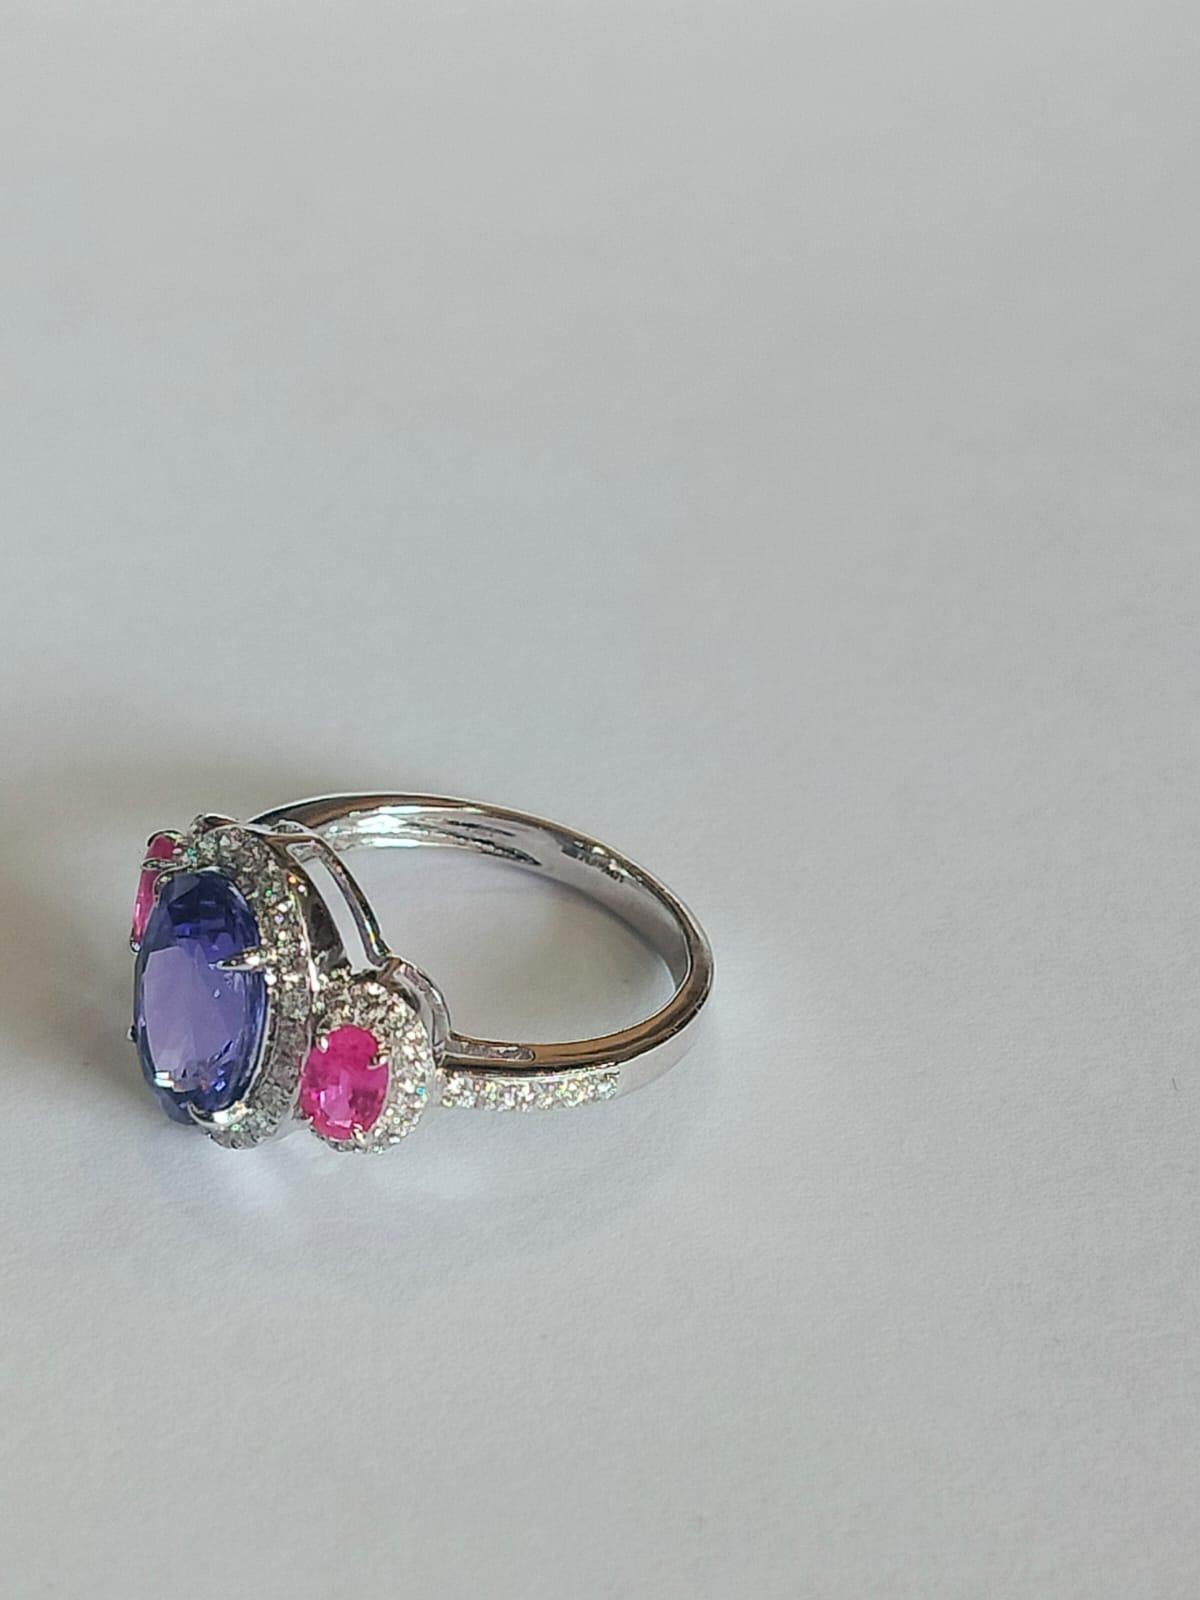 A very gorgeous and modern, Tanzanite and Pink Sapphire Engagement Ring set in 18K Gold & Diamonds. The weight of the Tanzanite is  2.90 carats. The Tanzanite is responsibly sourced from Tanzania. The weight of the Pink Sapphires is 0.65 carats. The